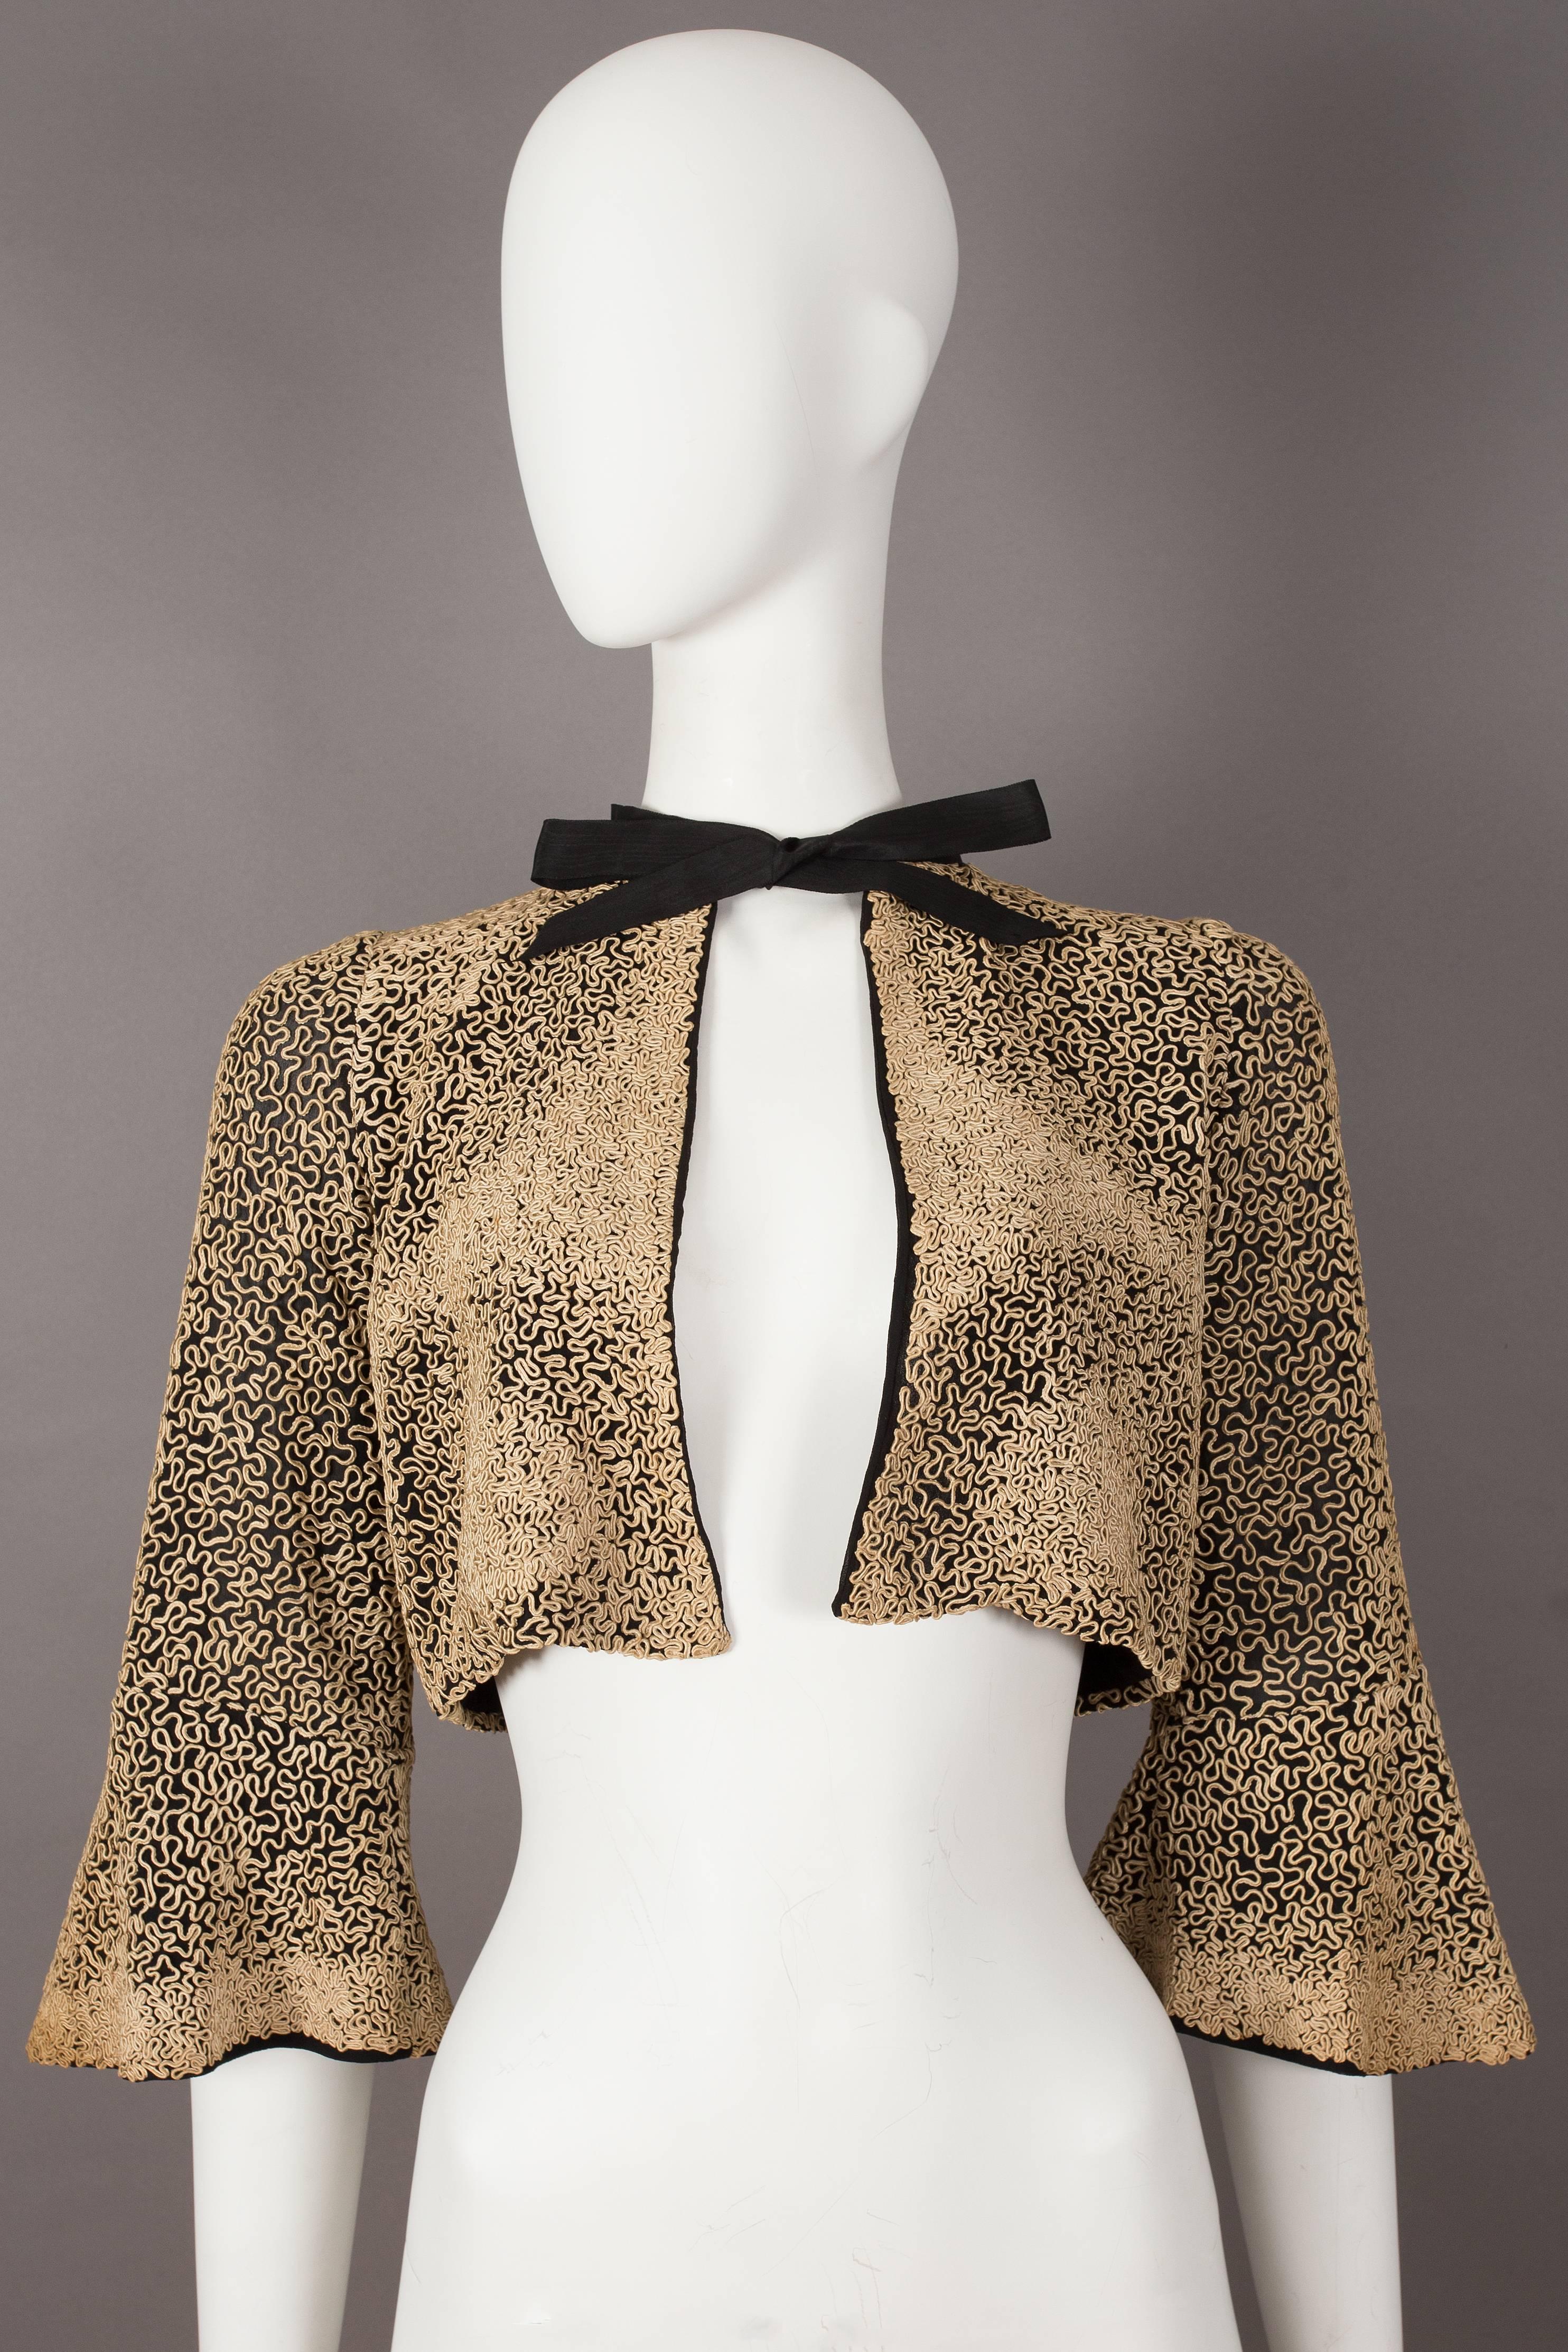 A beautiful 1930s bolero evening jacket with intricate ribbon embroidery throughout, cropped bell sleeves, silk chiffon lining and black bow fastening on the collar.